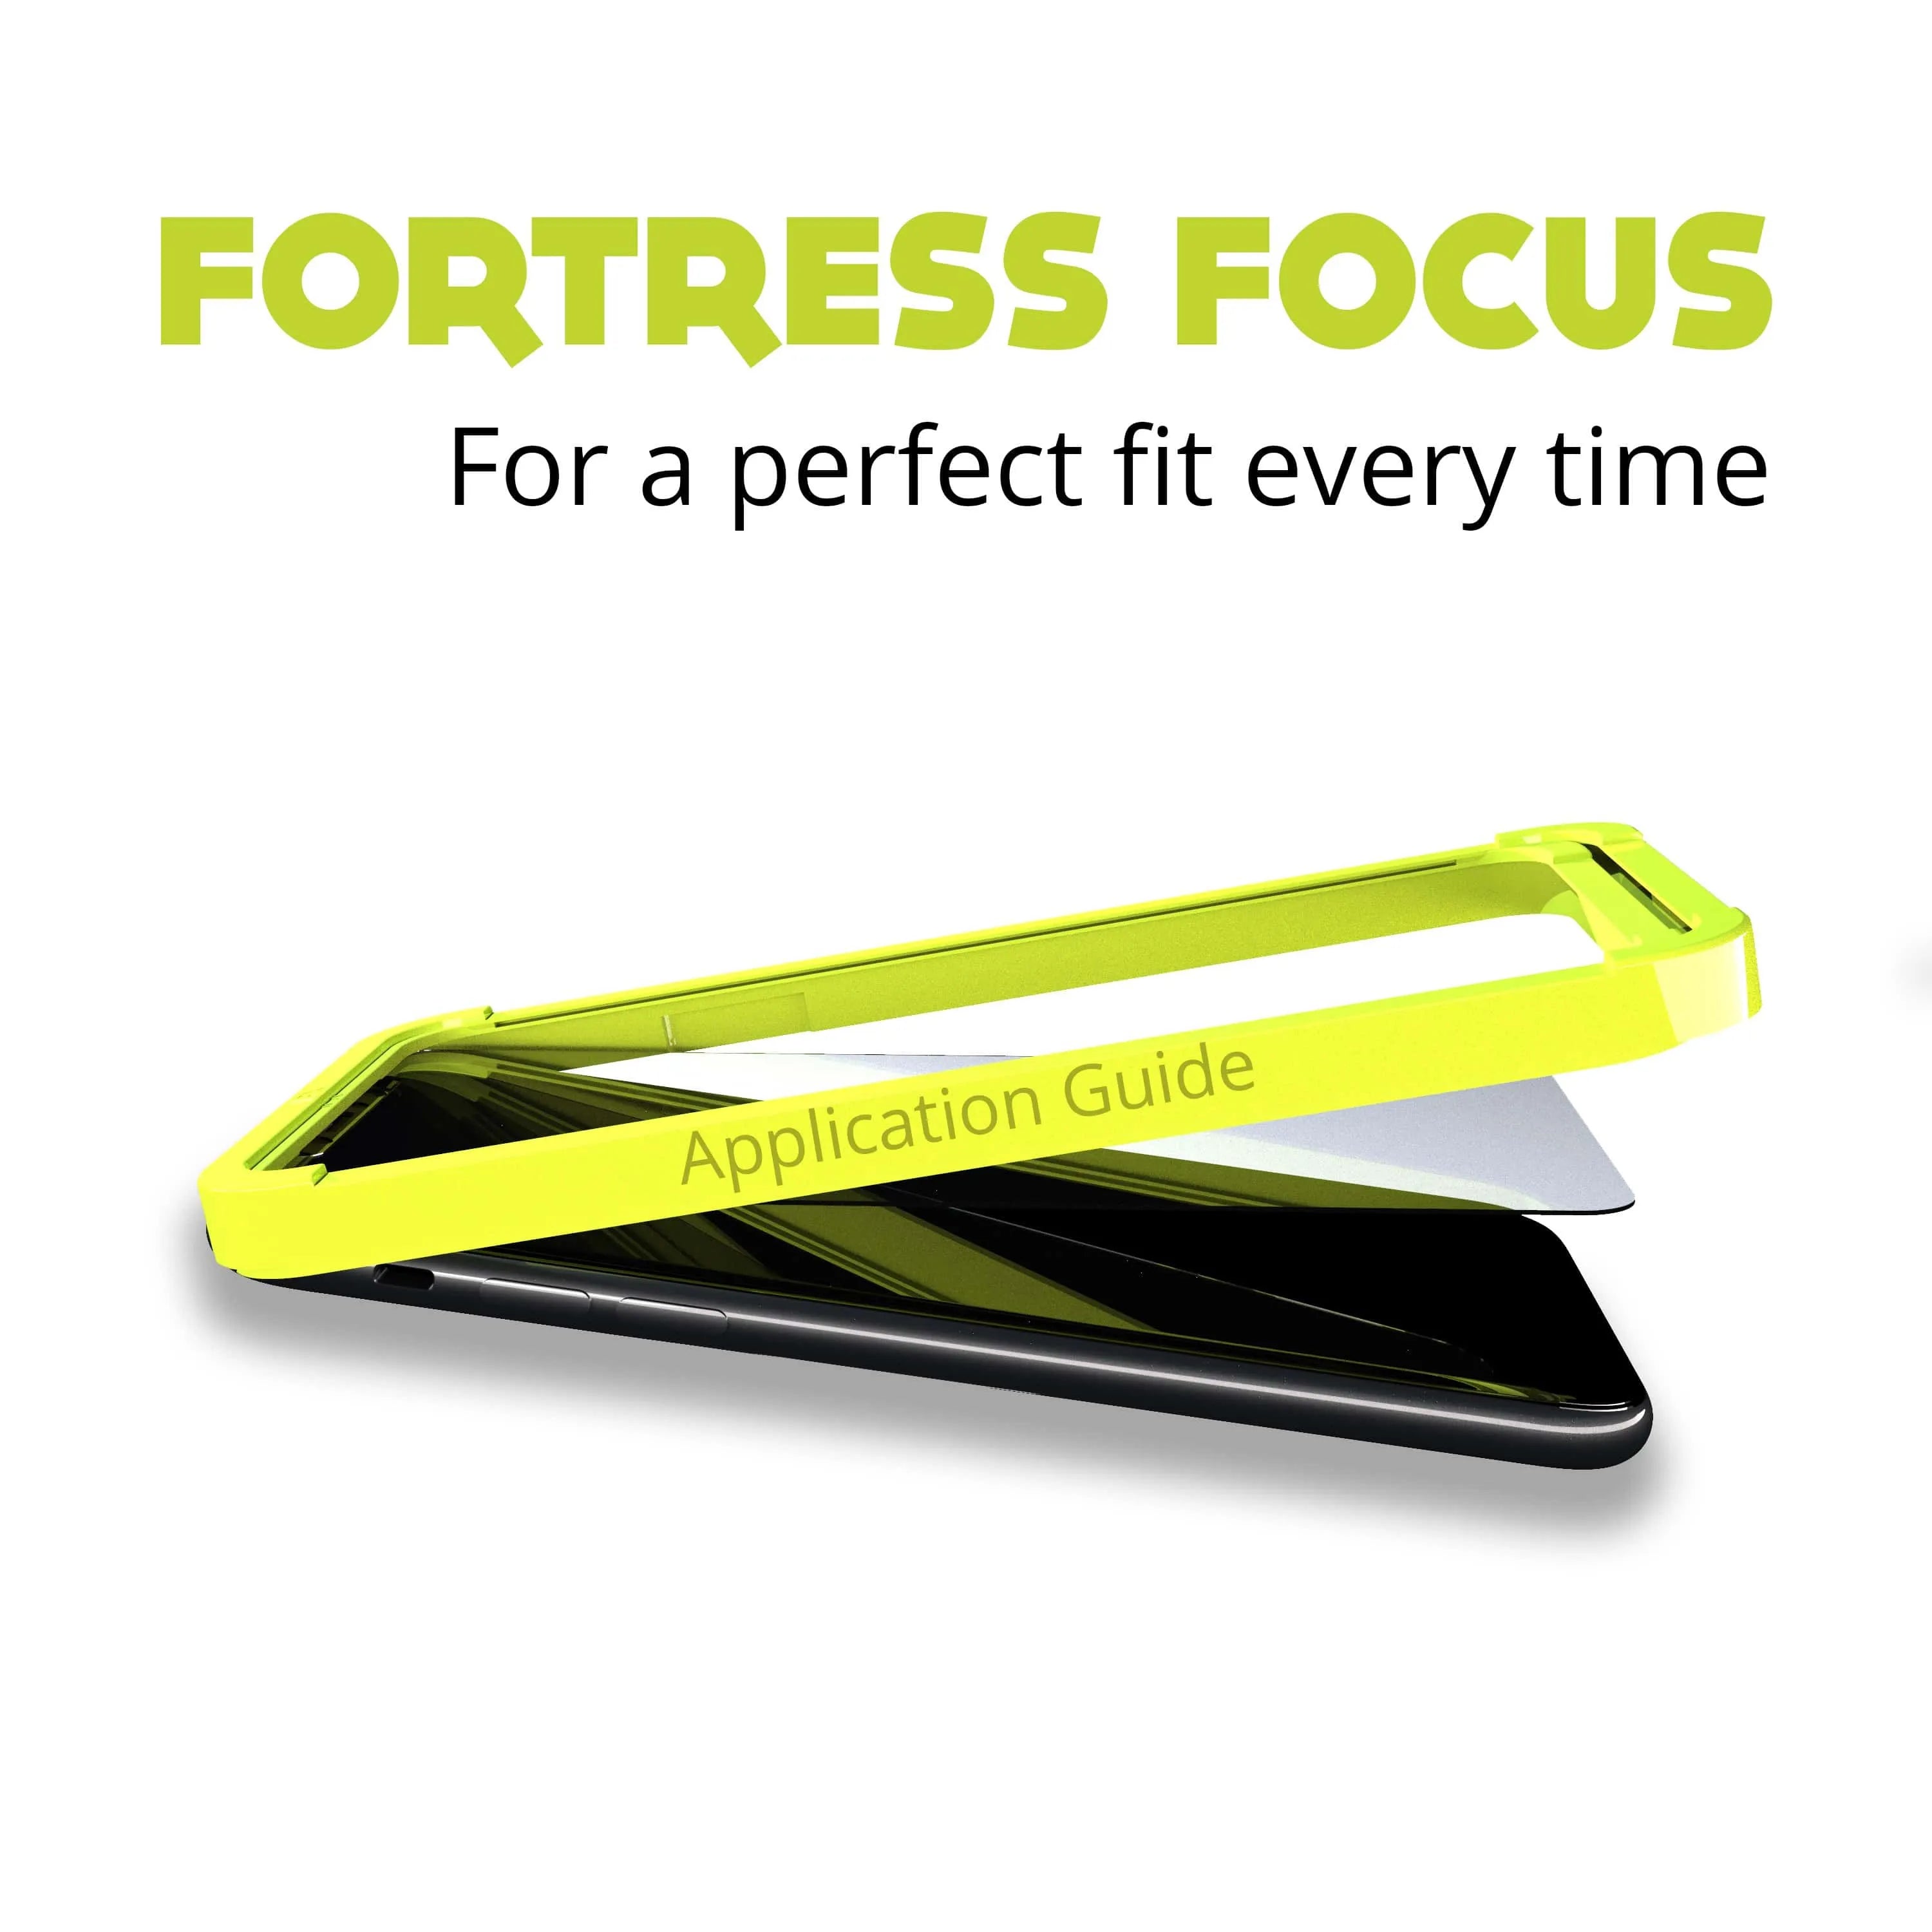 Fortress iPhone X Screen Protector - $200 Device Coverage  Scooch Screen Protector